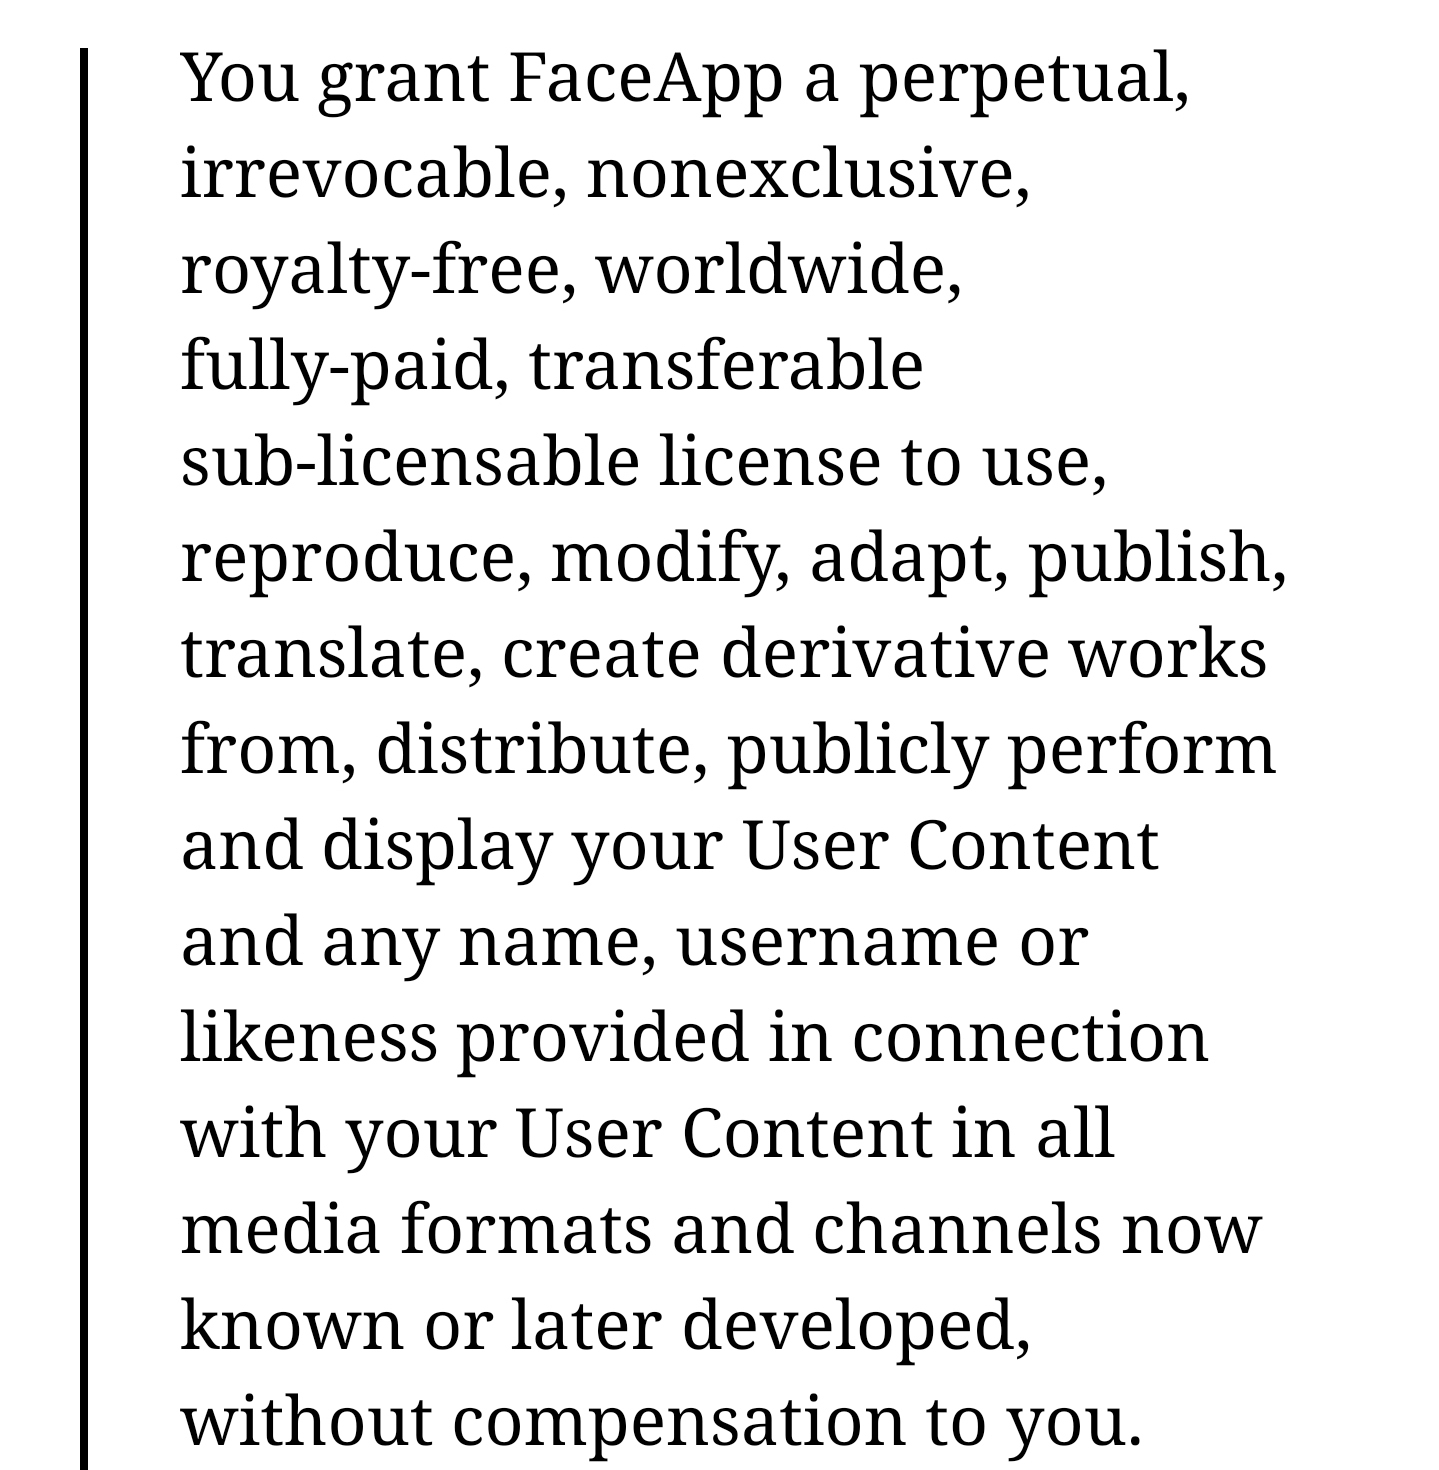 You grant Face App a perpetual, irrevocable, nonexclusive, royaltyfree, worldwide, fullypaid, transferable sublicensable license to use, reproduce, modify, adapt, publish, translate, create derivative works from, distribute, publicly perform and display…